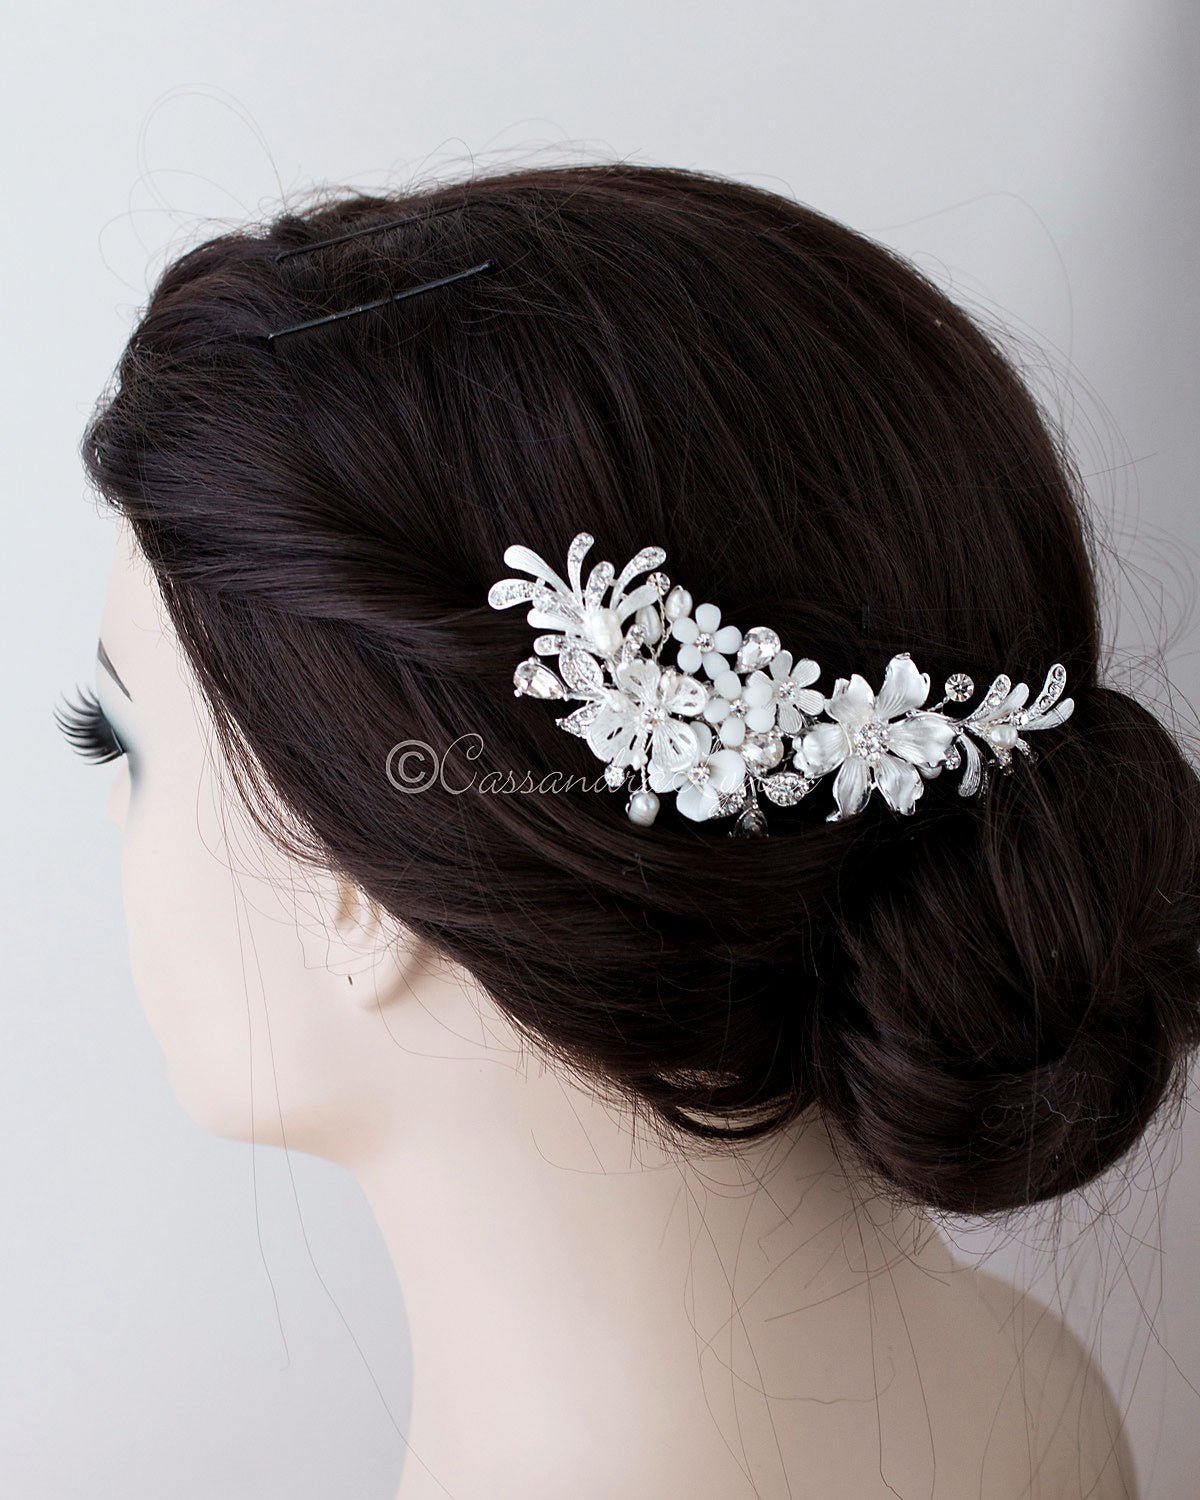 Bridal Hair Comb of Porcelain Flowers and Pearls - Cassandra Lynne